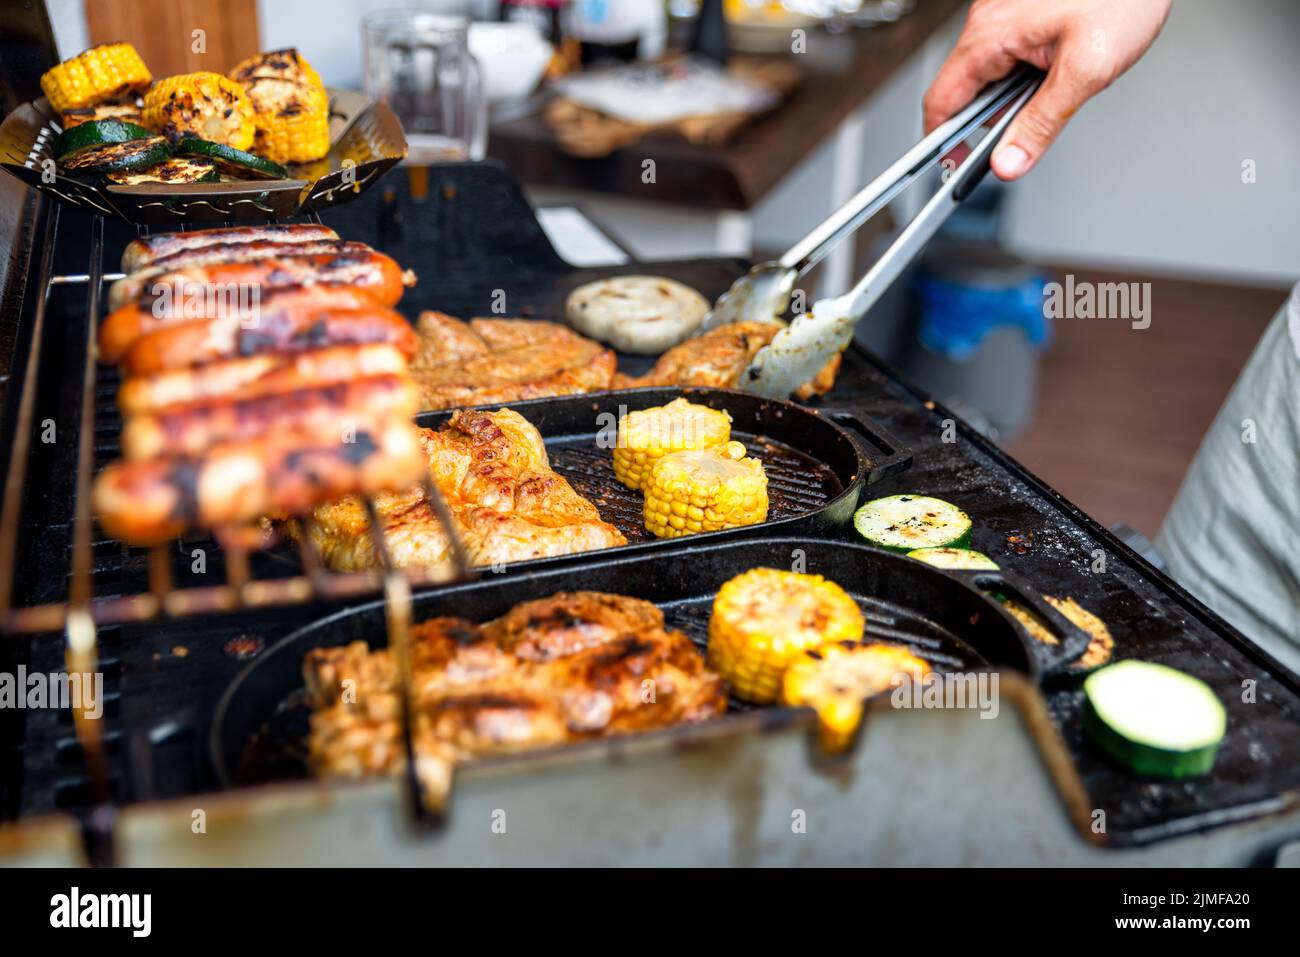 Grill barbecue outdoors on the backyard. Bbq party. Stock Photo